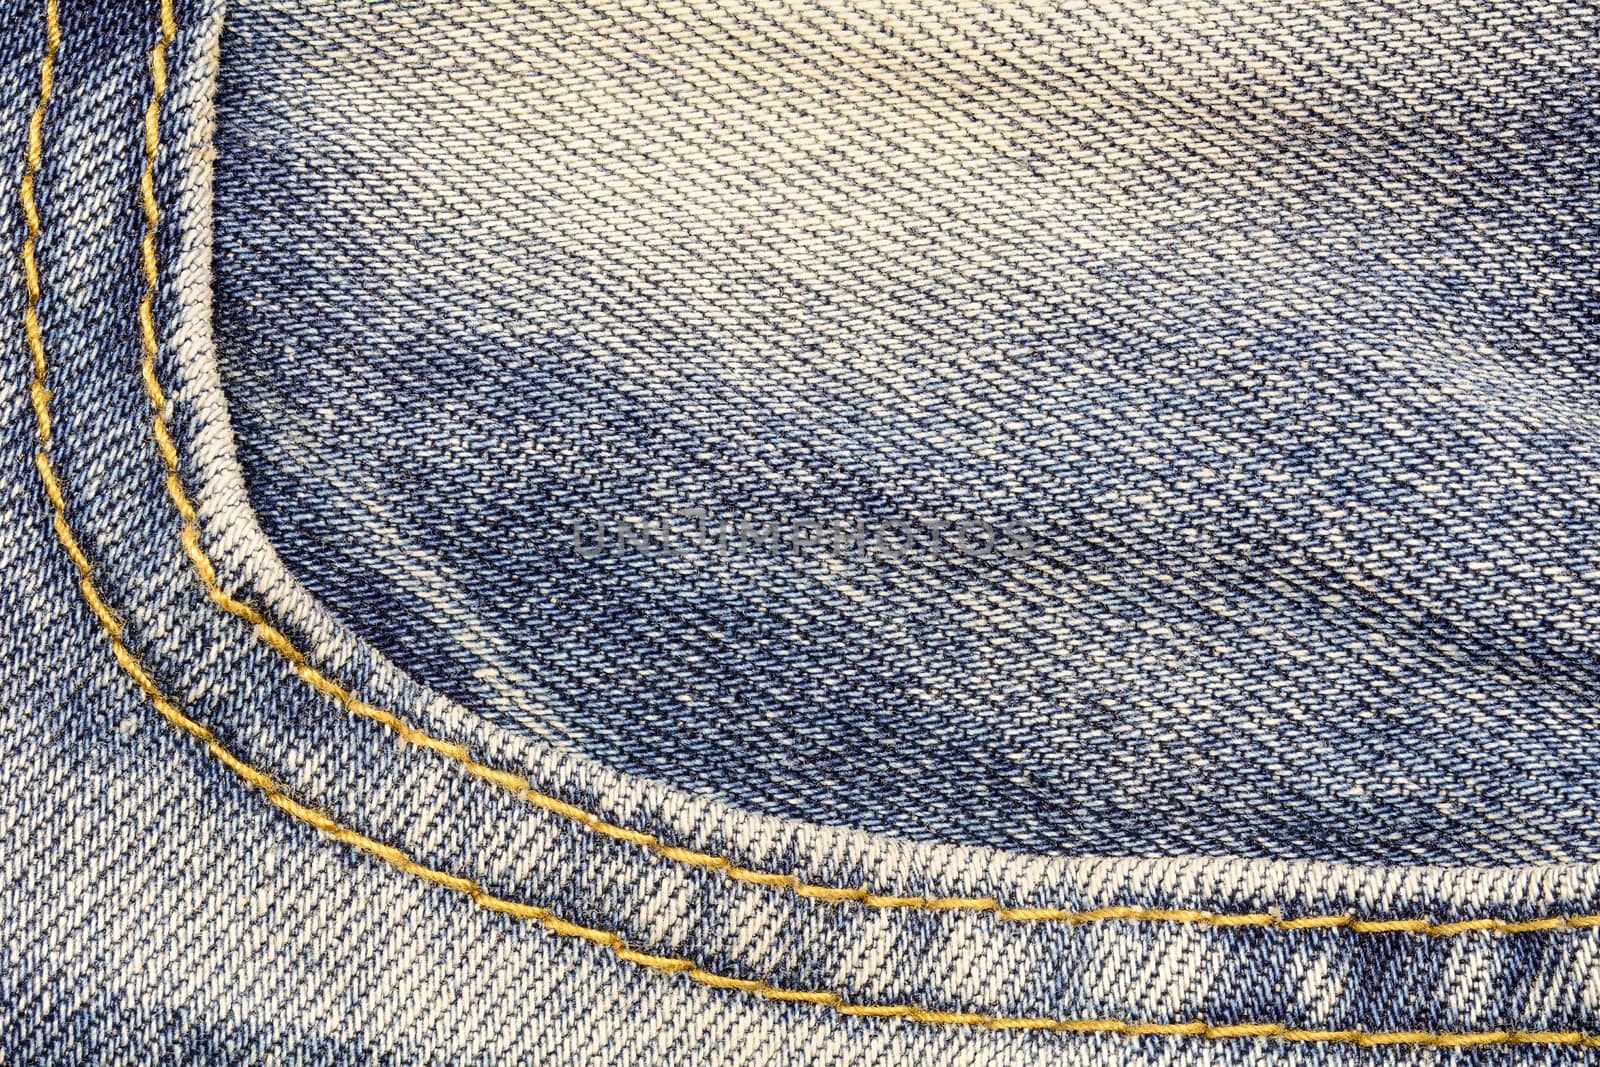 Denim jeans texture with curve seams for fashion background